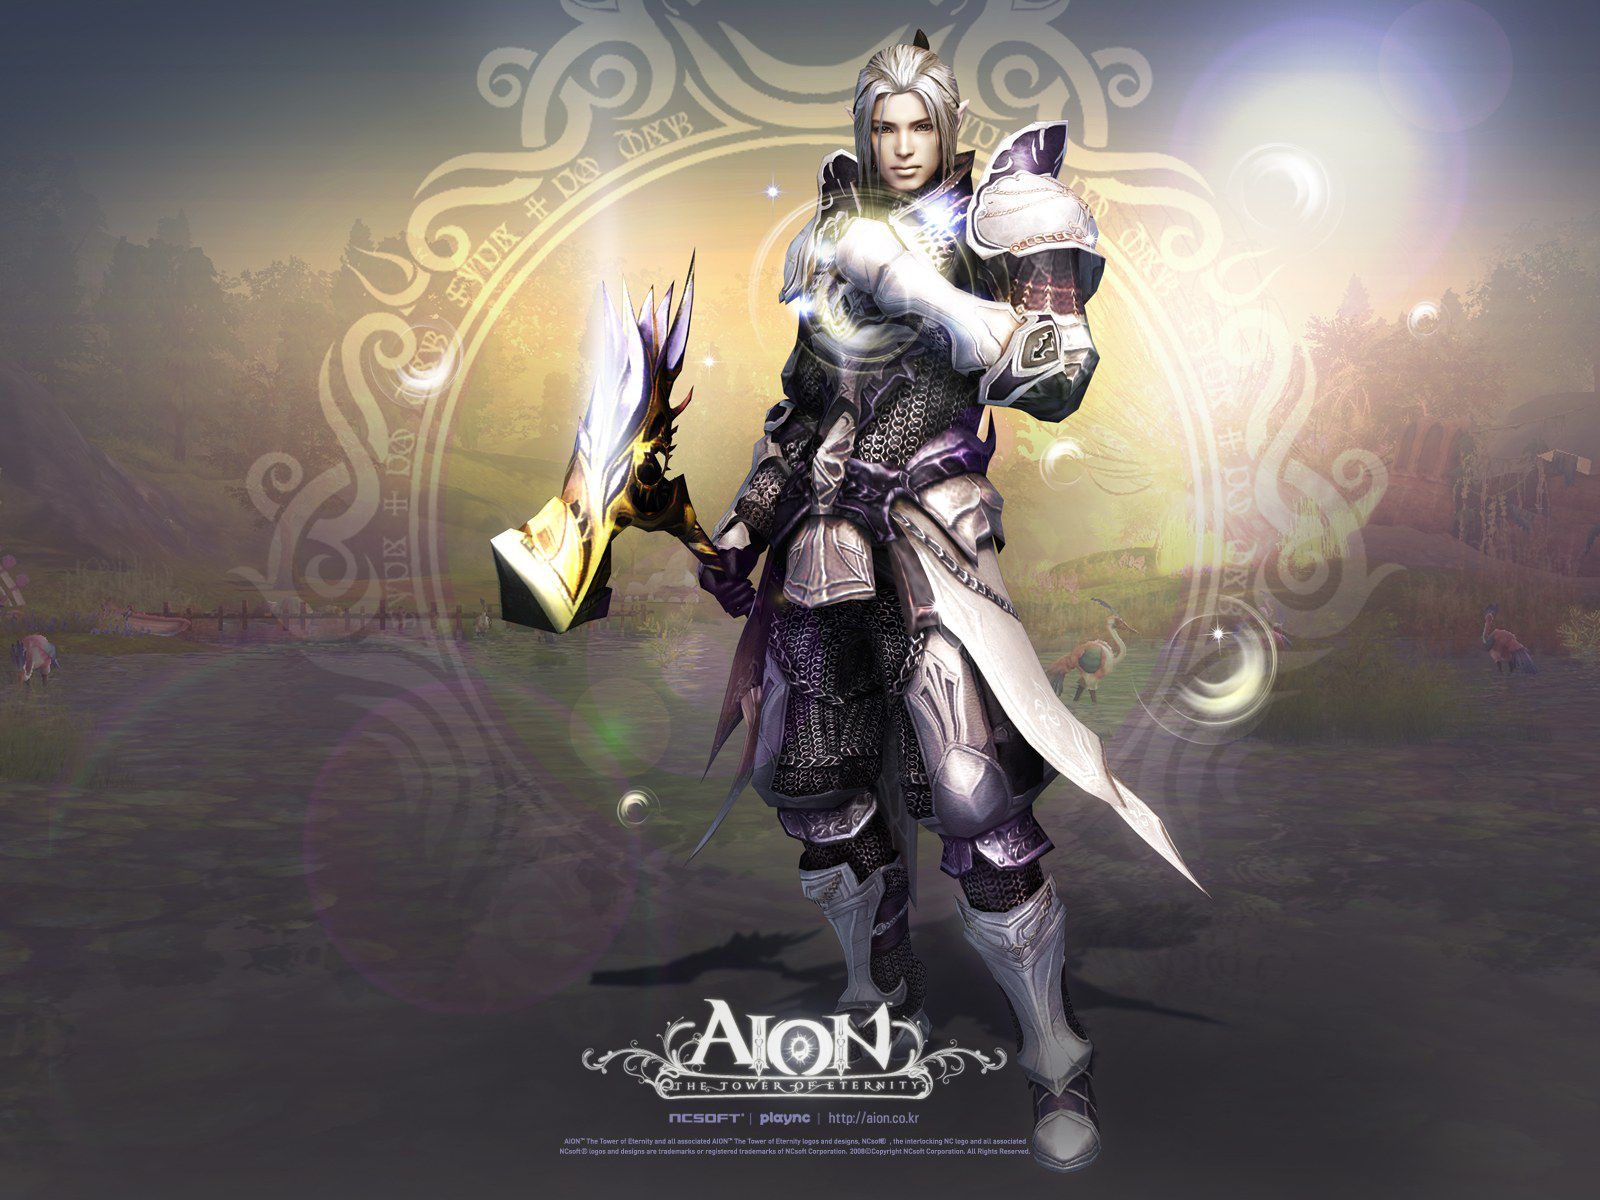 Download_Aion_Full_HD_Wallpapers-cgfrog_com_29